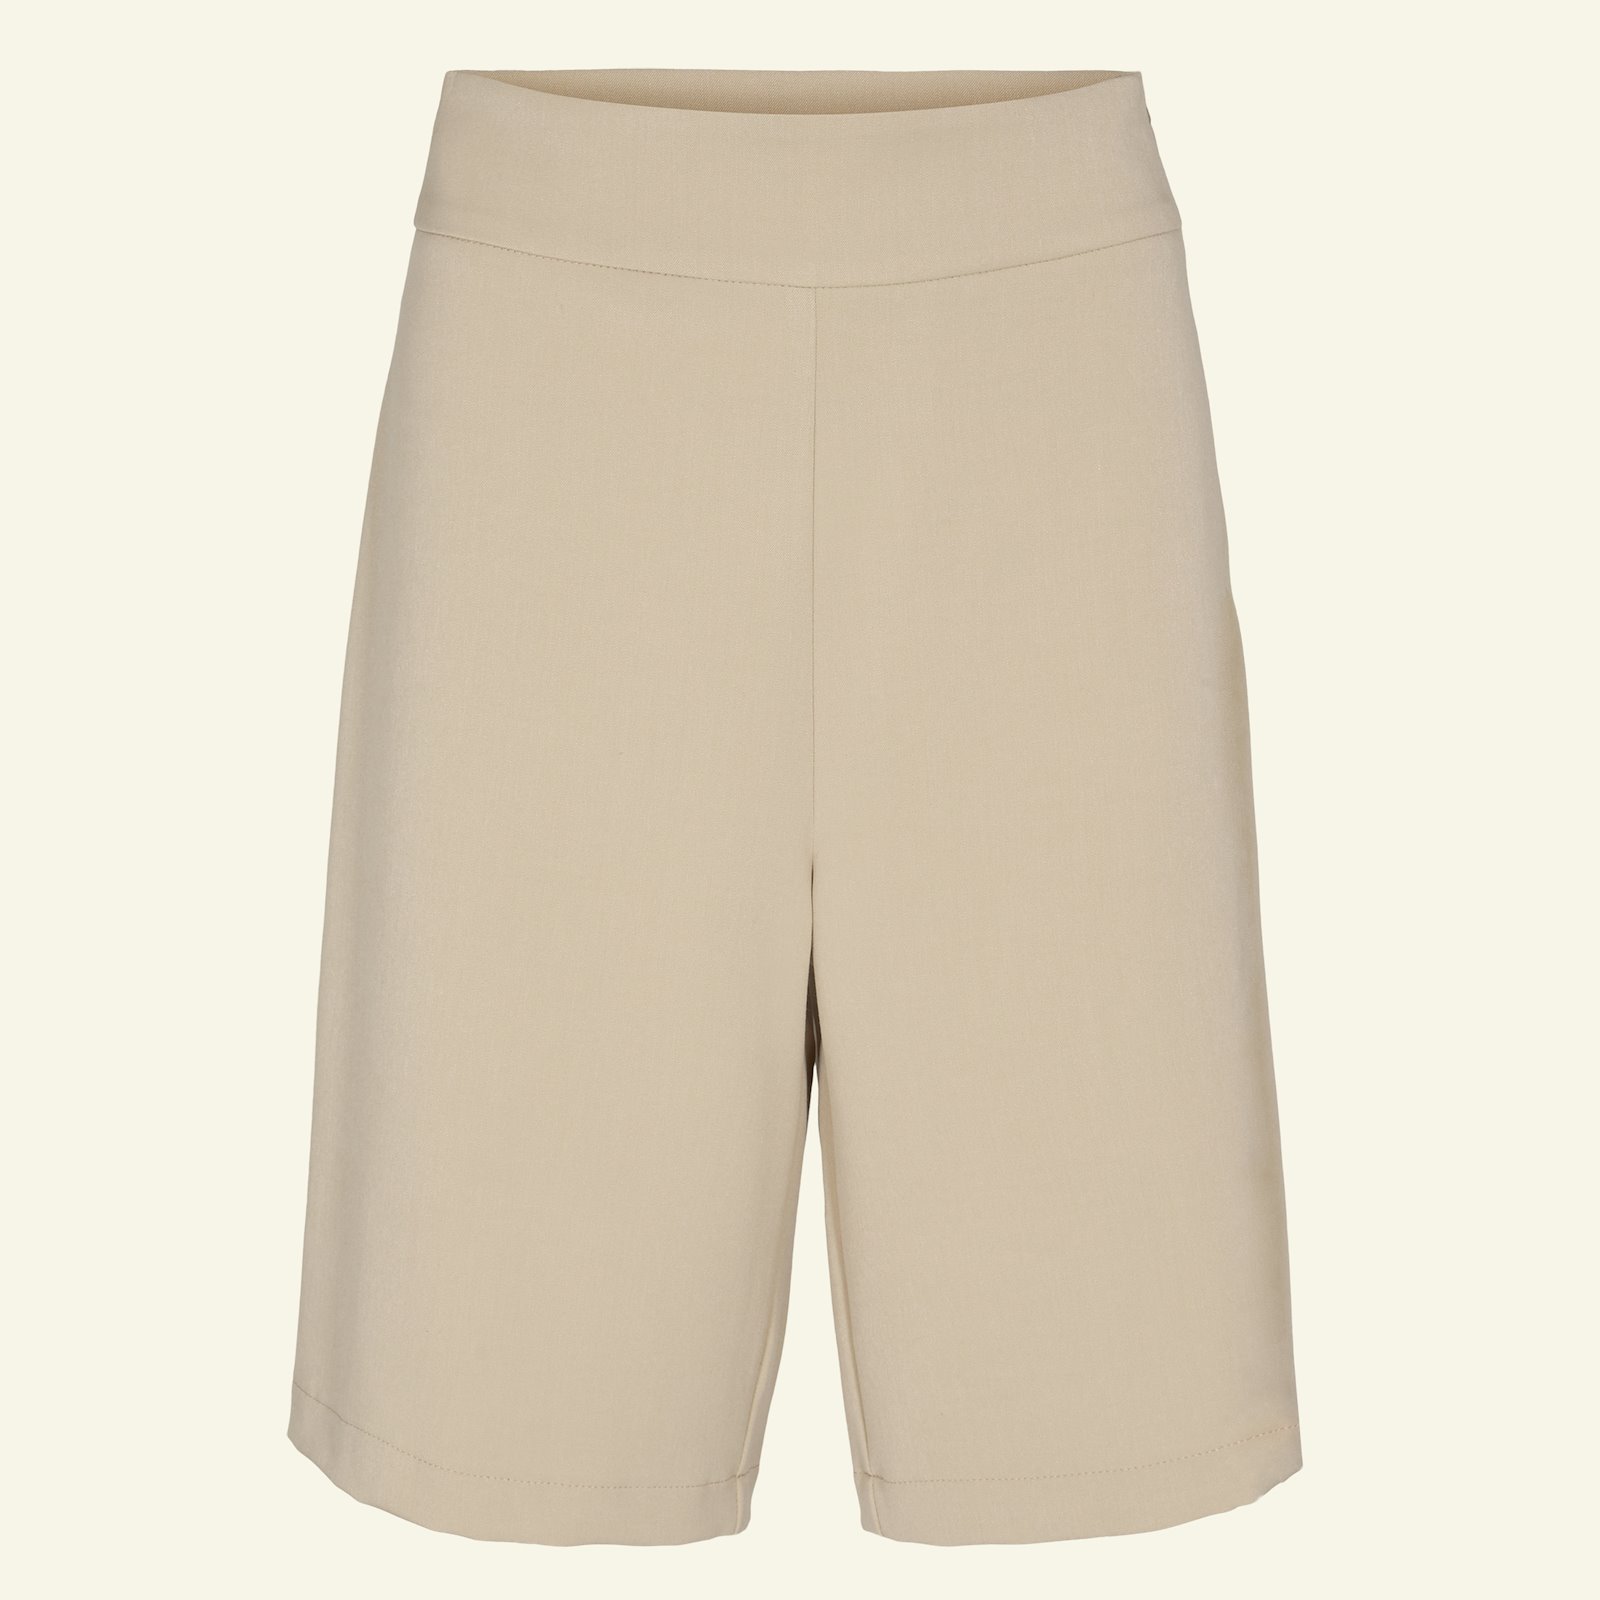 Highwaist and wide legs trousers, 34/6 p20052_460857_sskit